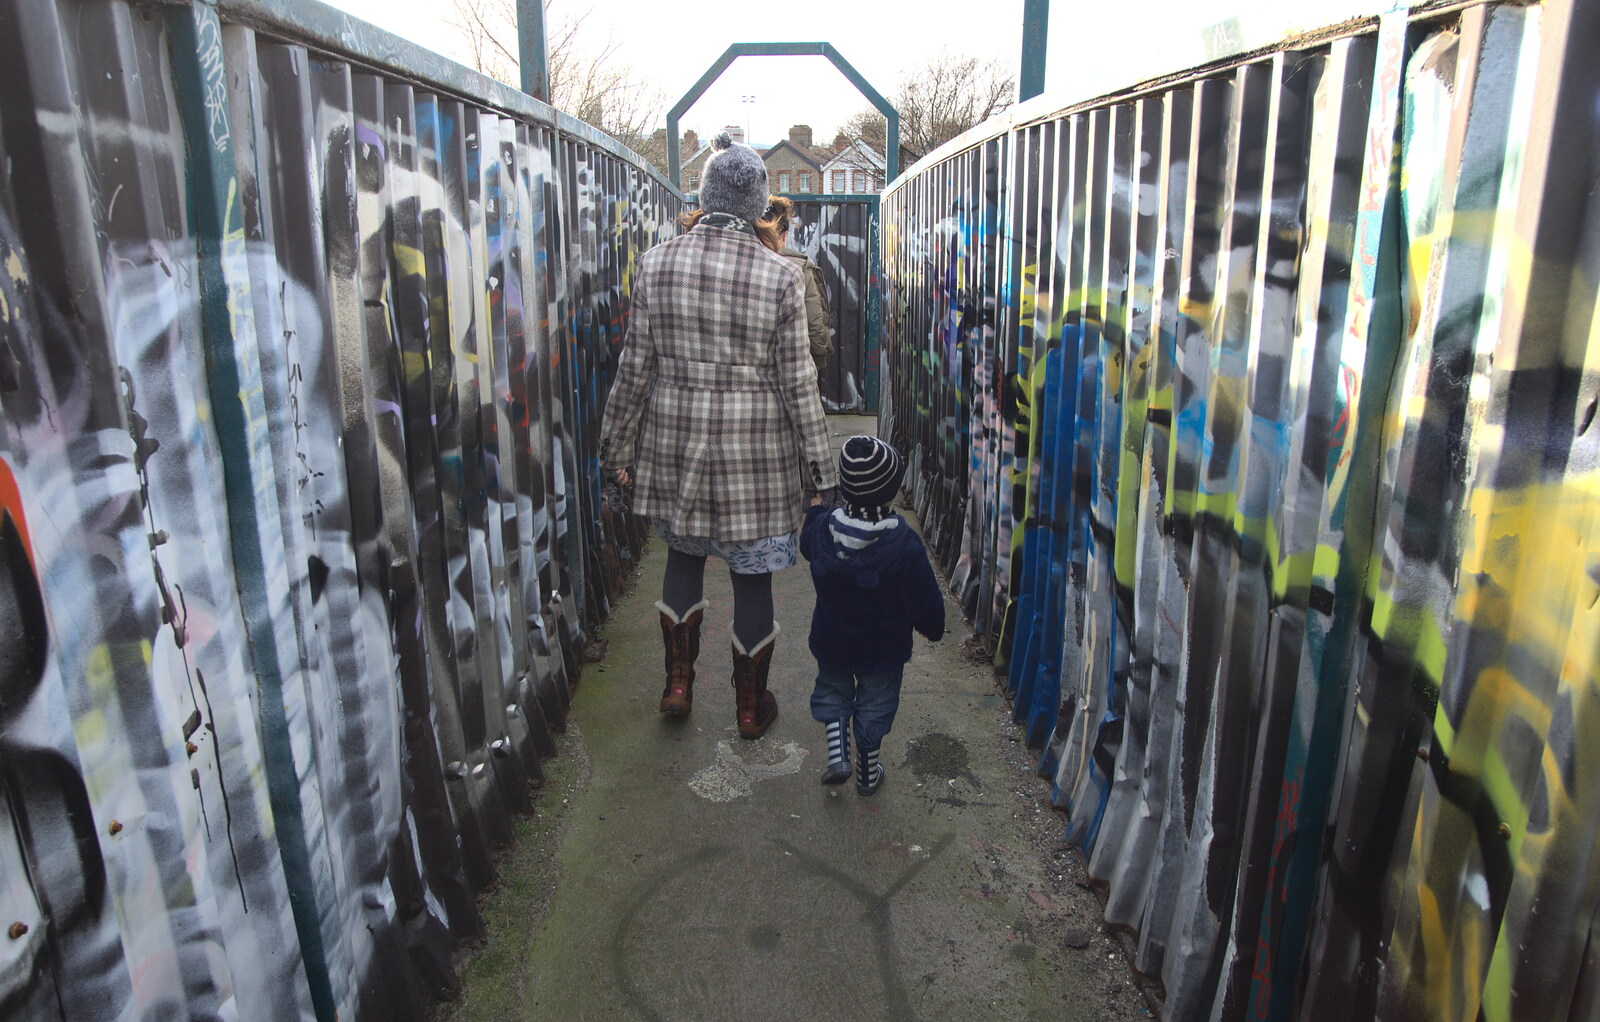 Isobel and Fred on graffiti bridge from A Morning in Blackrock, County Dublin, Ireland - 8th January 2012